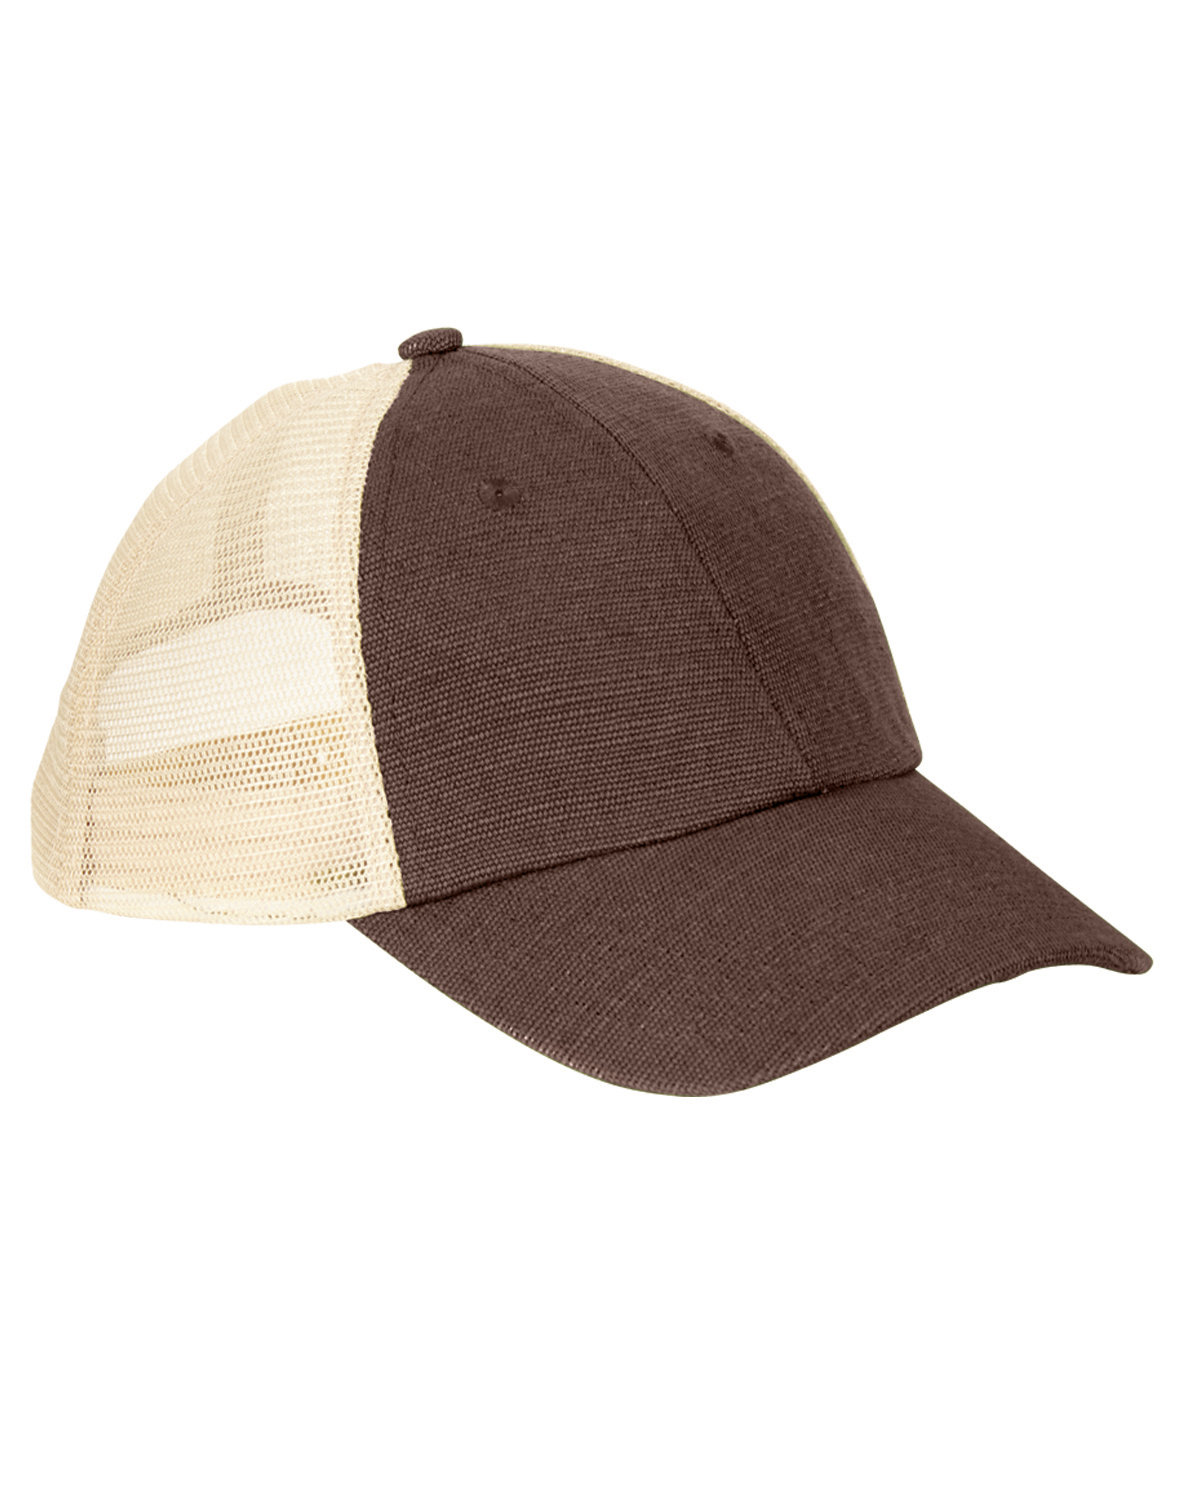 Front view of Washed Hemp Blend Trucker Hat